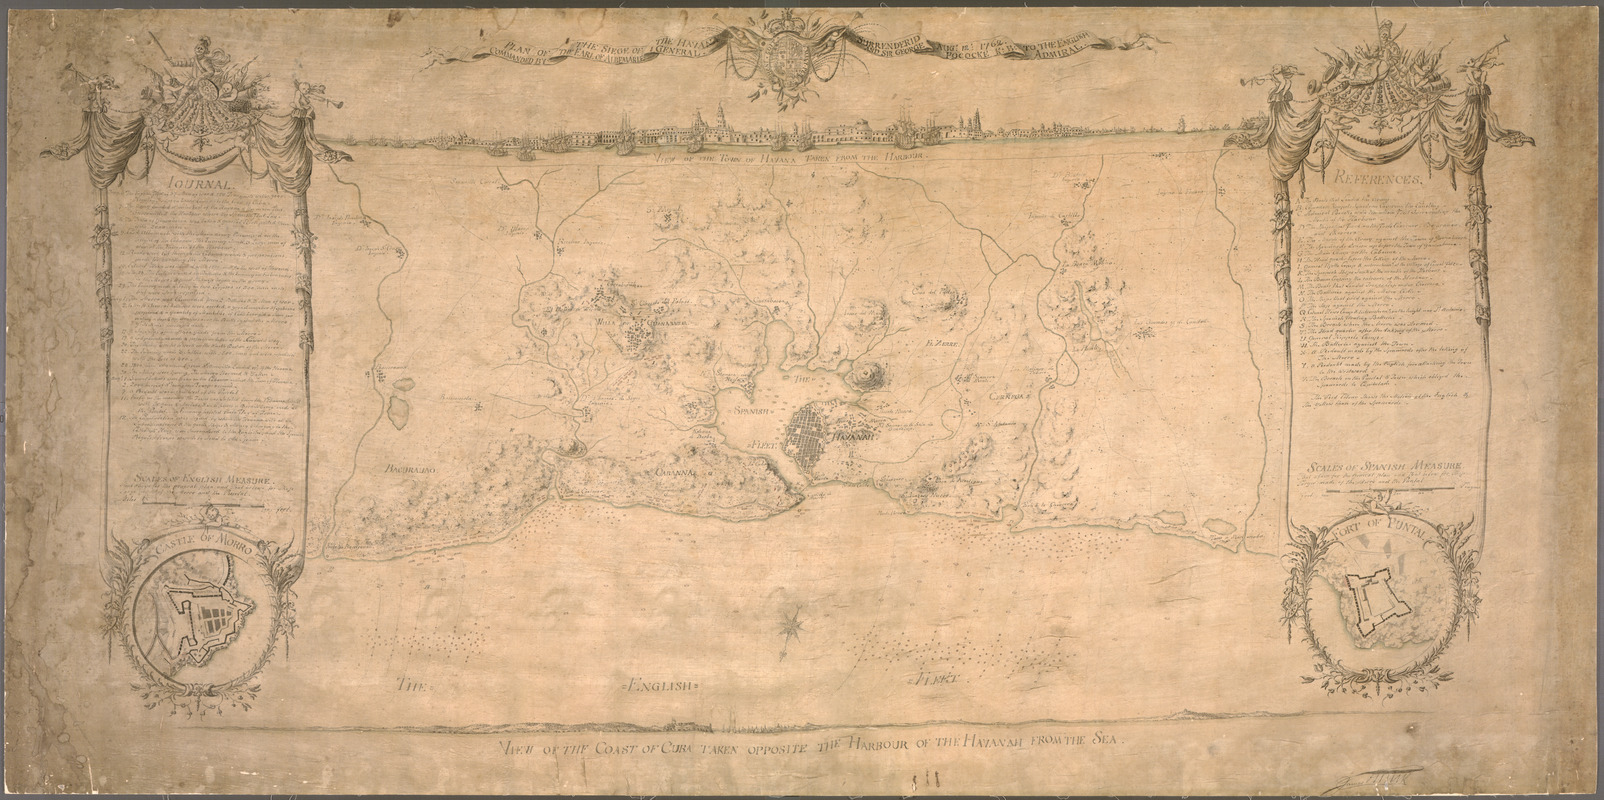 Plan of the siege of the Havana surrenderid [sic] Aug. 12, 1762 to the English commanded by the Earl of Albemarle General and Sir George Pococke K.B. Admiral